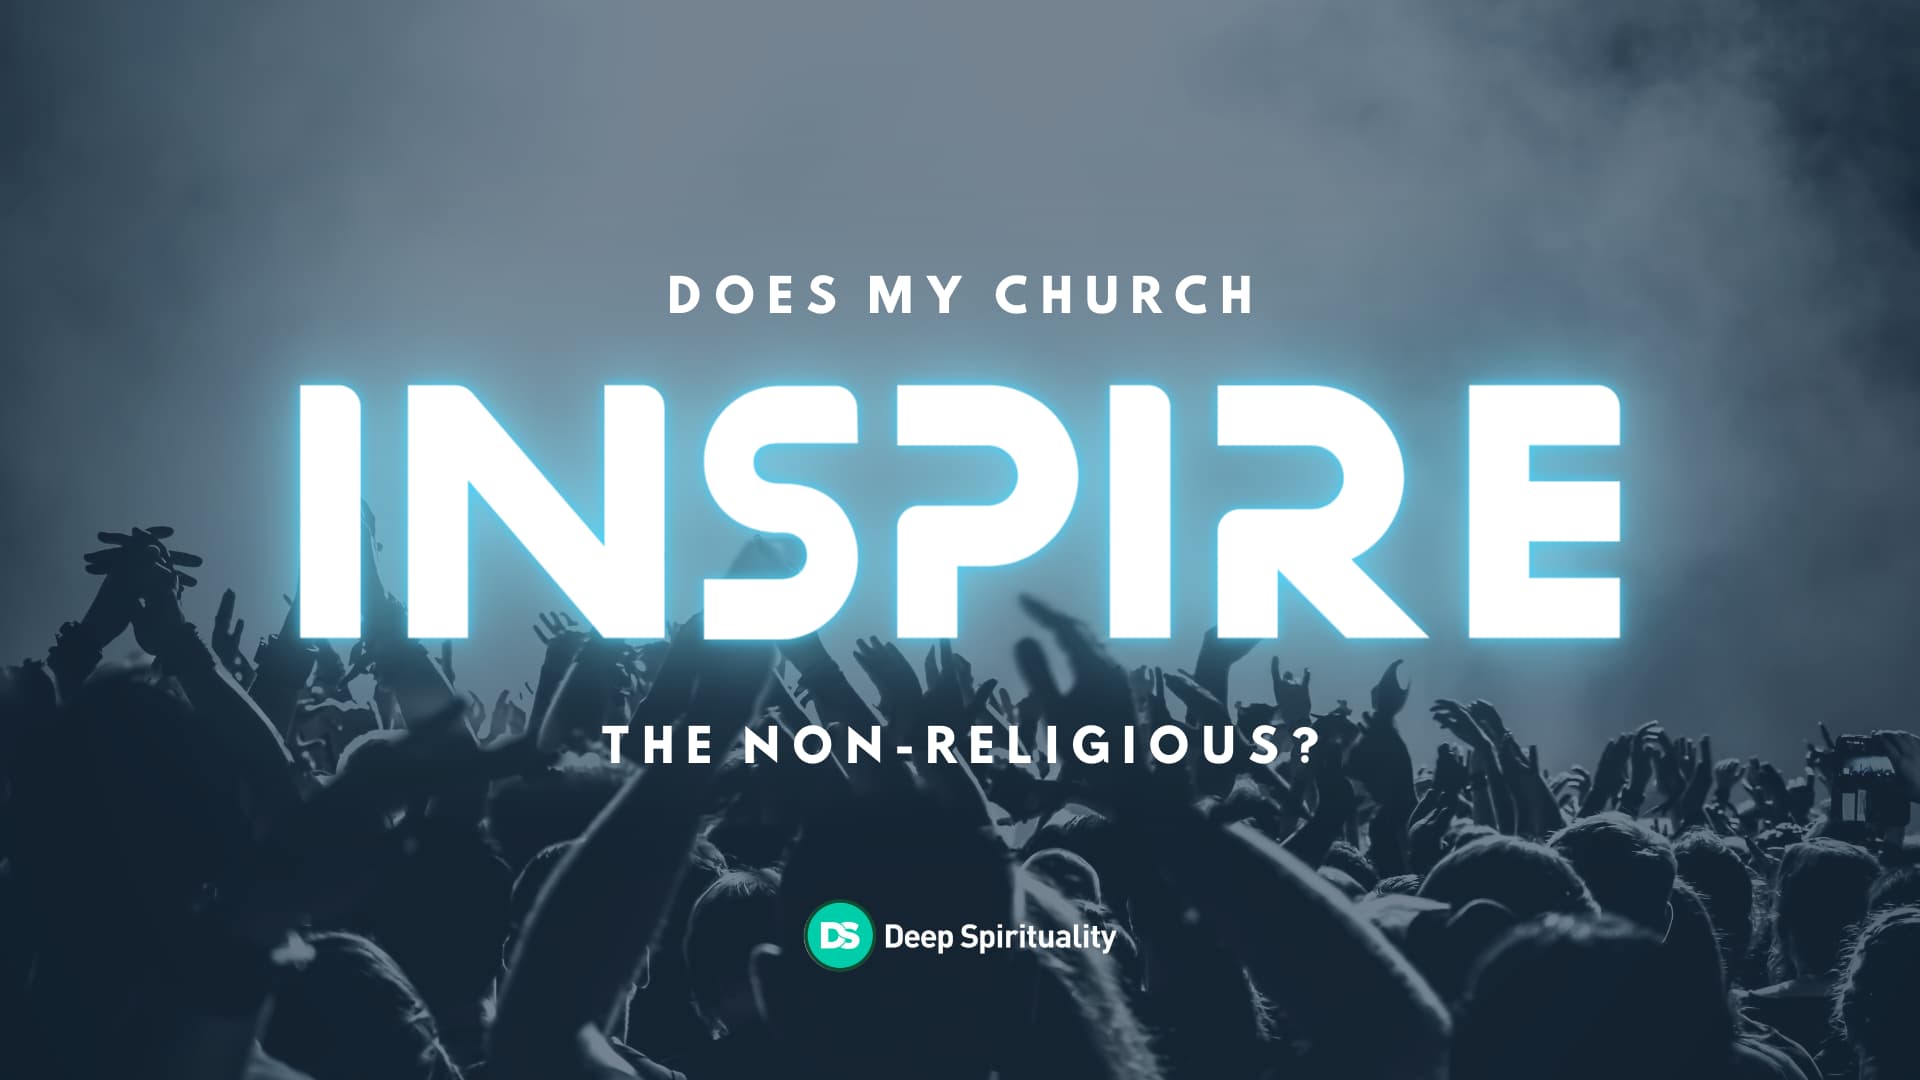 Does My Church Inspire the Non-Religious? 19